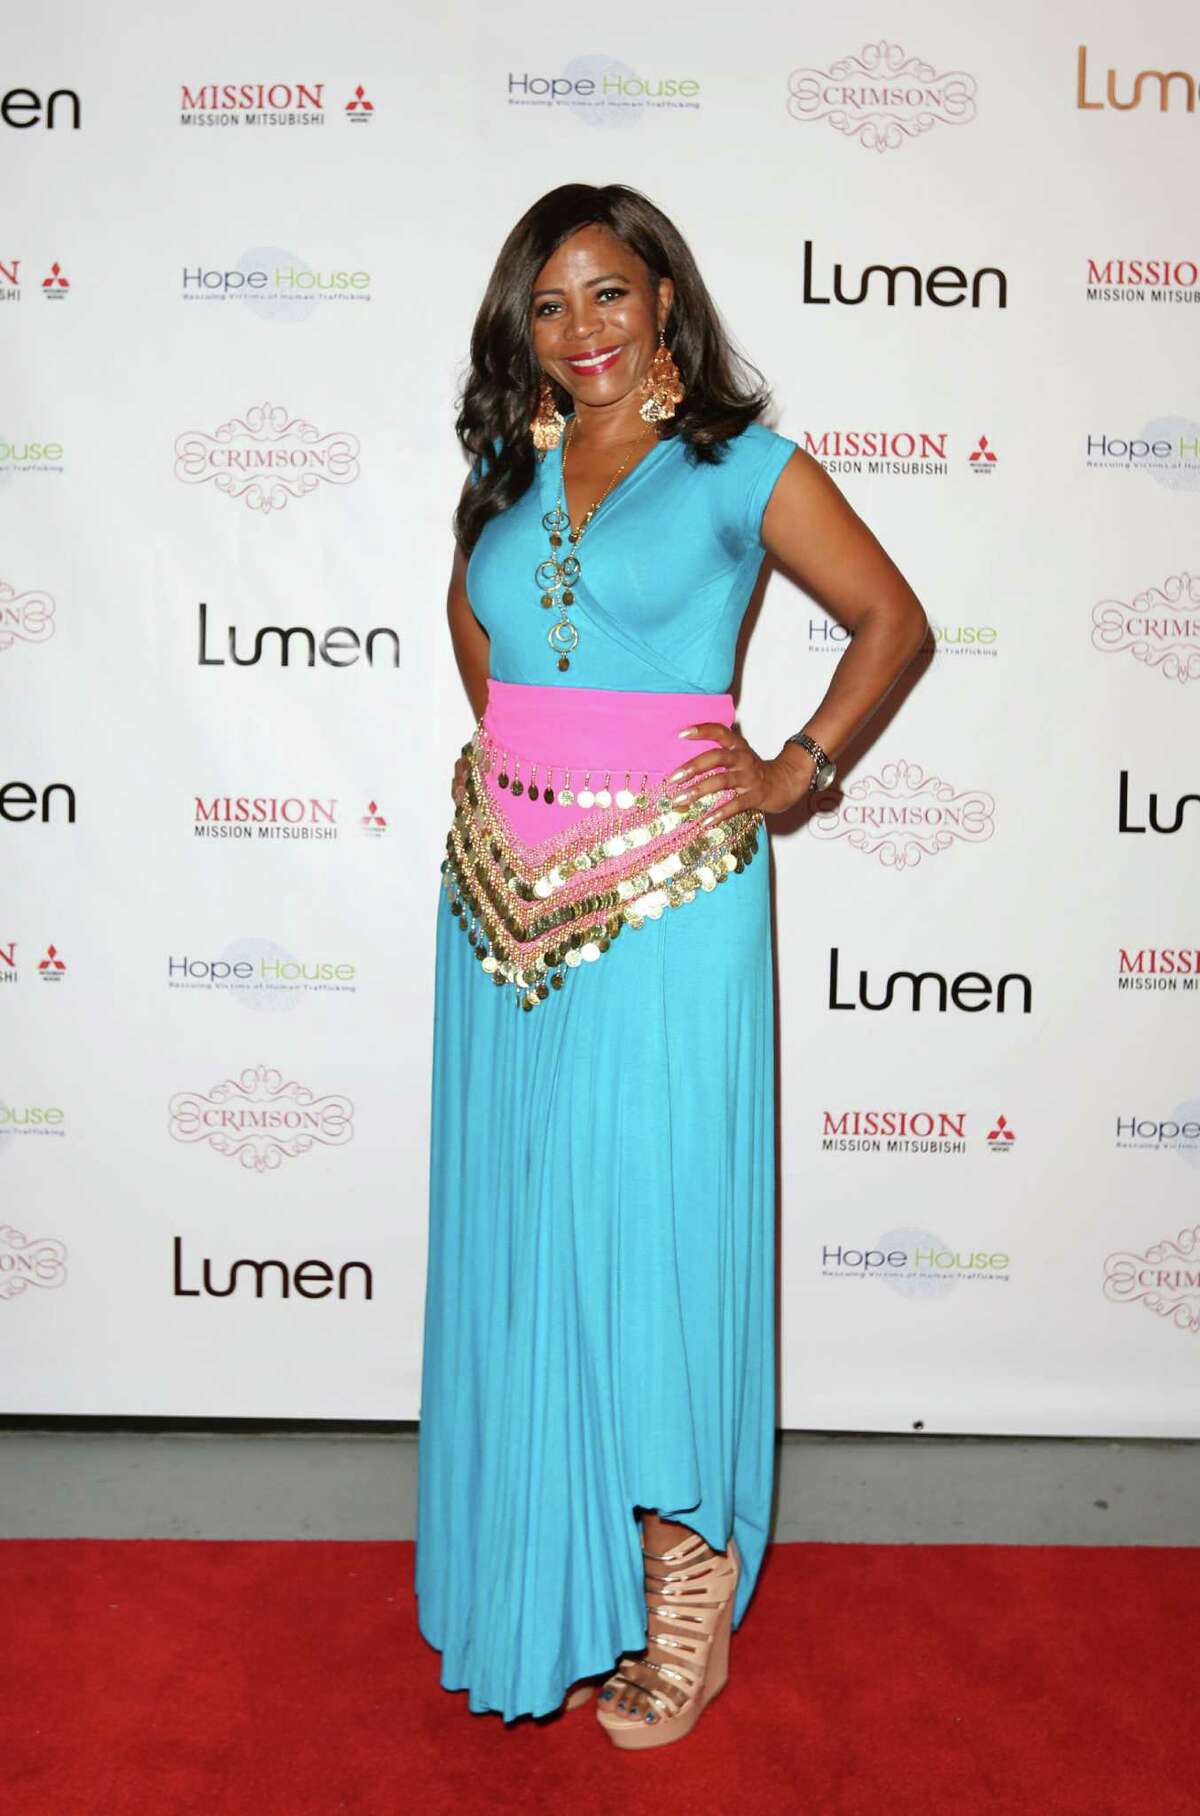 FILE - Darian Ward attends the Bollywood Blitz event in Houston, Texas on June 5, 2015. Mayor Sylvester Turner suspended Ward for 10 days, accusing her of conducting personal business on city time and failing to turn over public records requested by a local journalist.